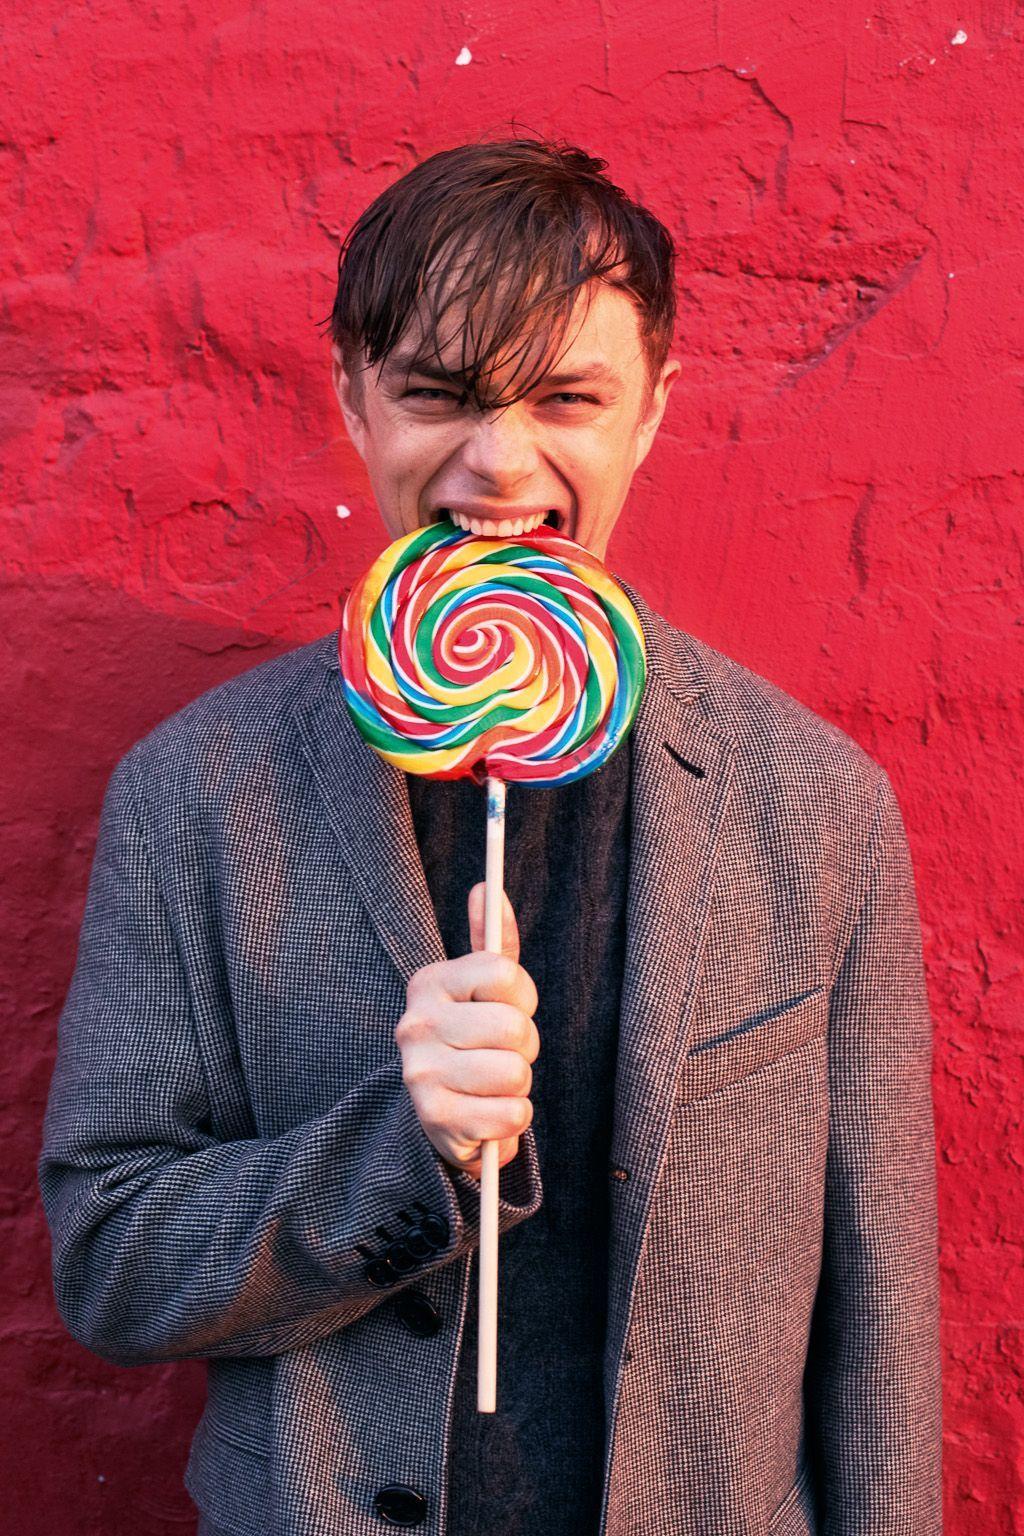 Dane DeHaan by Terry Richardson for GQ Style UK. Dane